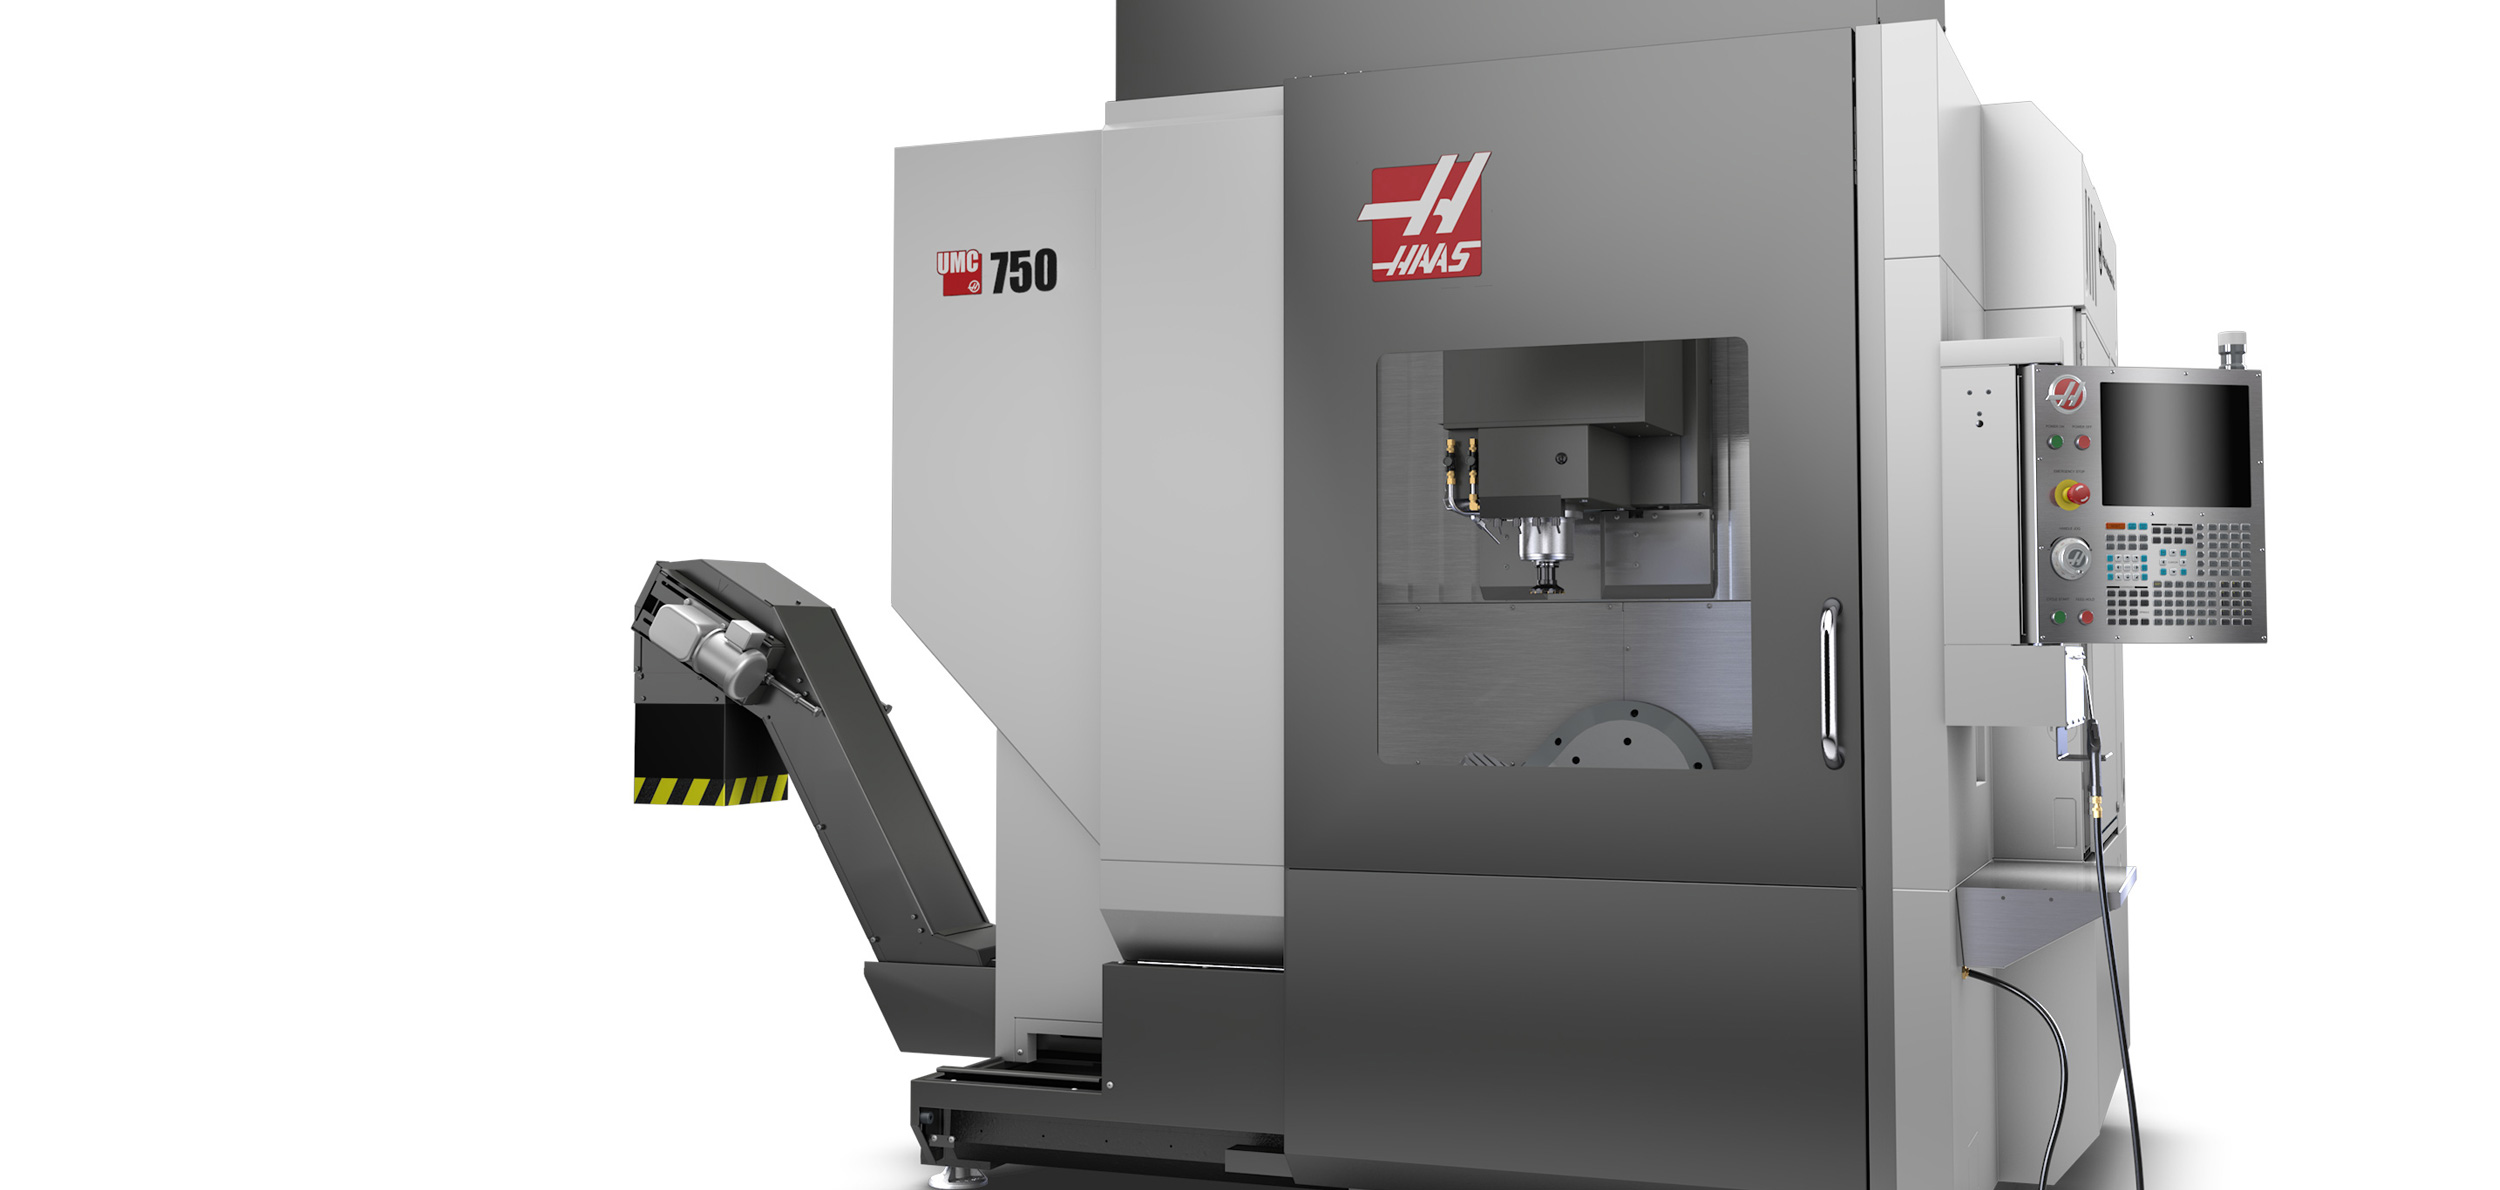 ALTITUDE INDUSTRIE, NEW 5-AXIS MACHINING CENTER